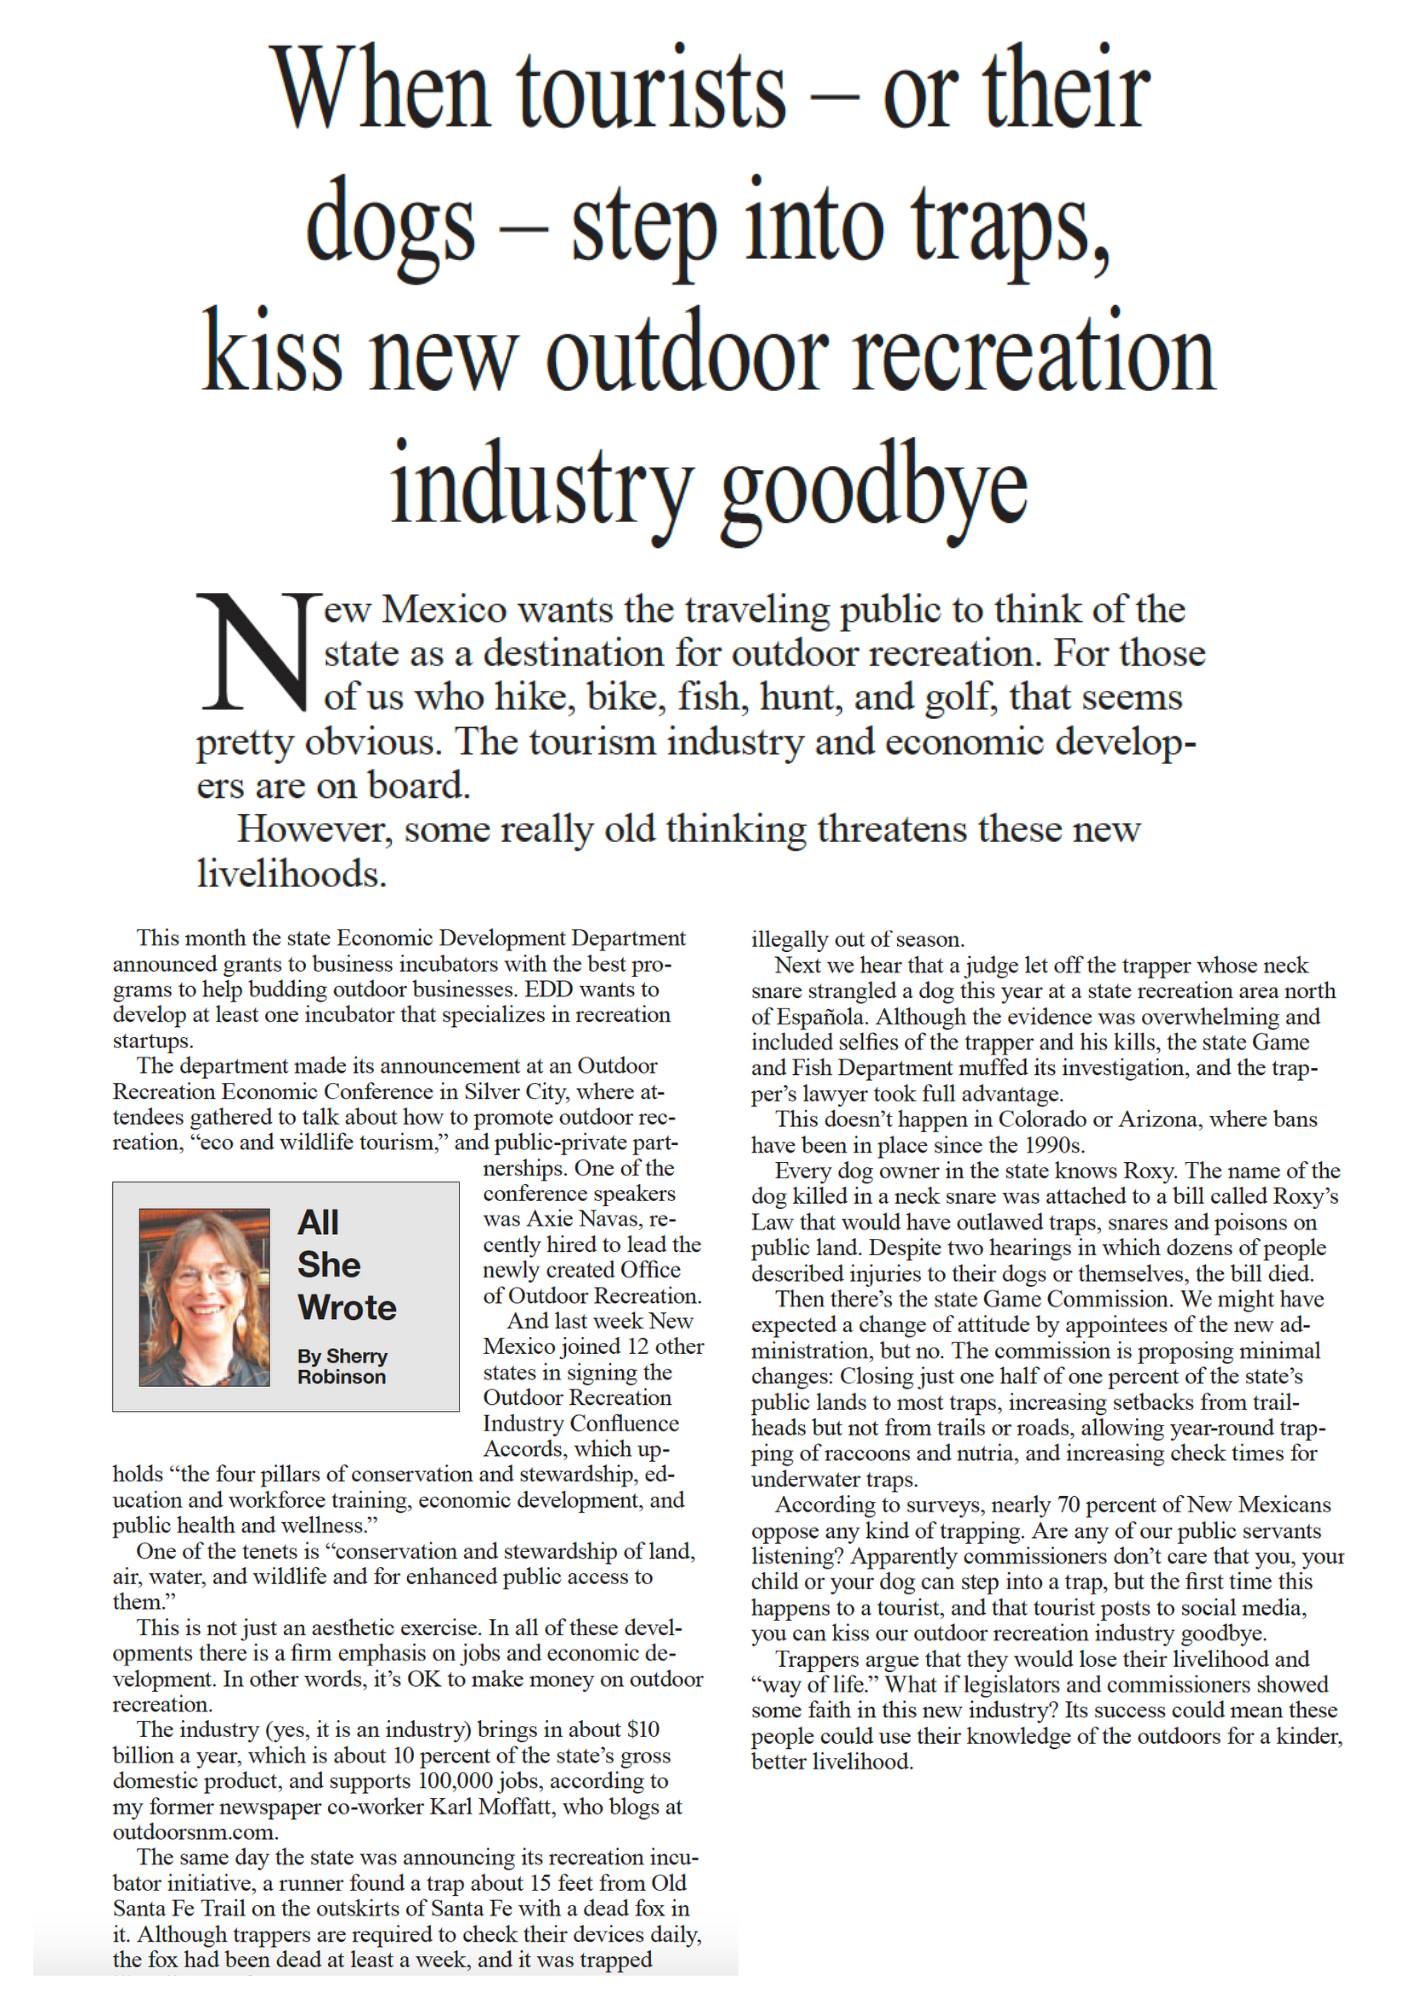 When tourists or their dogs step into traps, you can kiss new outdoor recreation industry goodbye